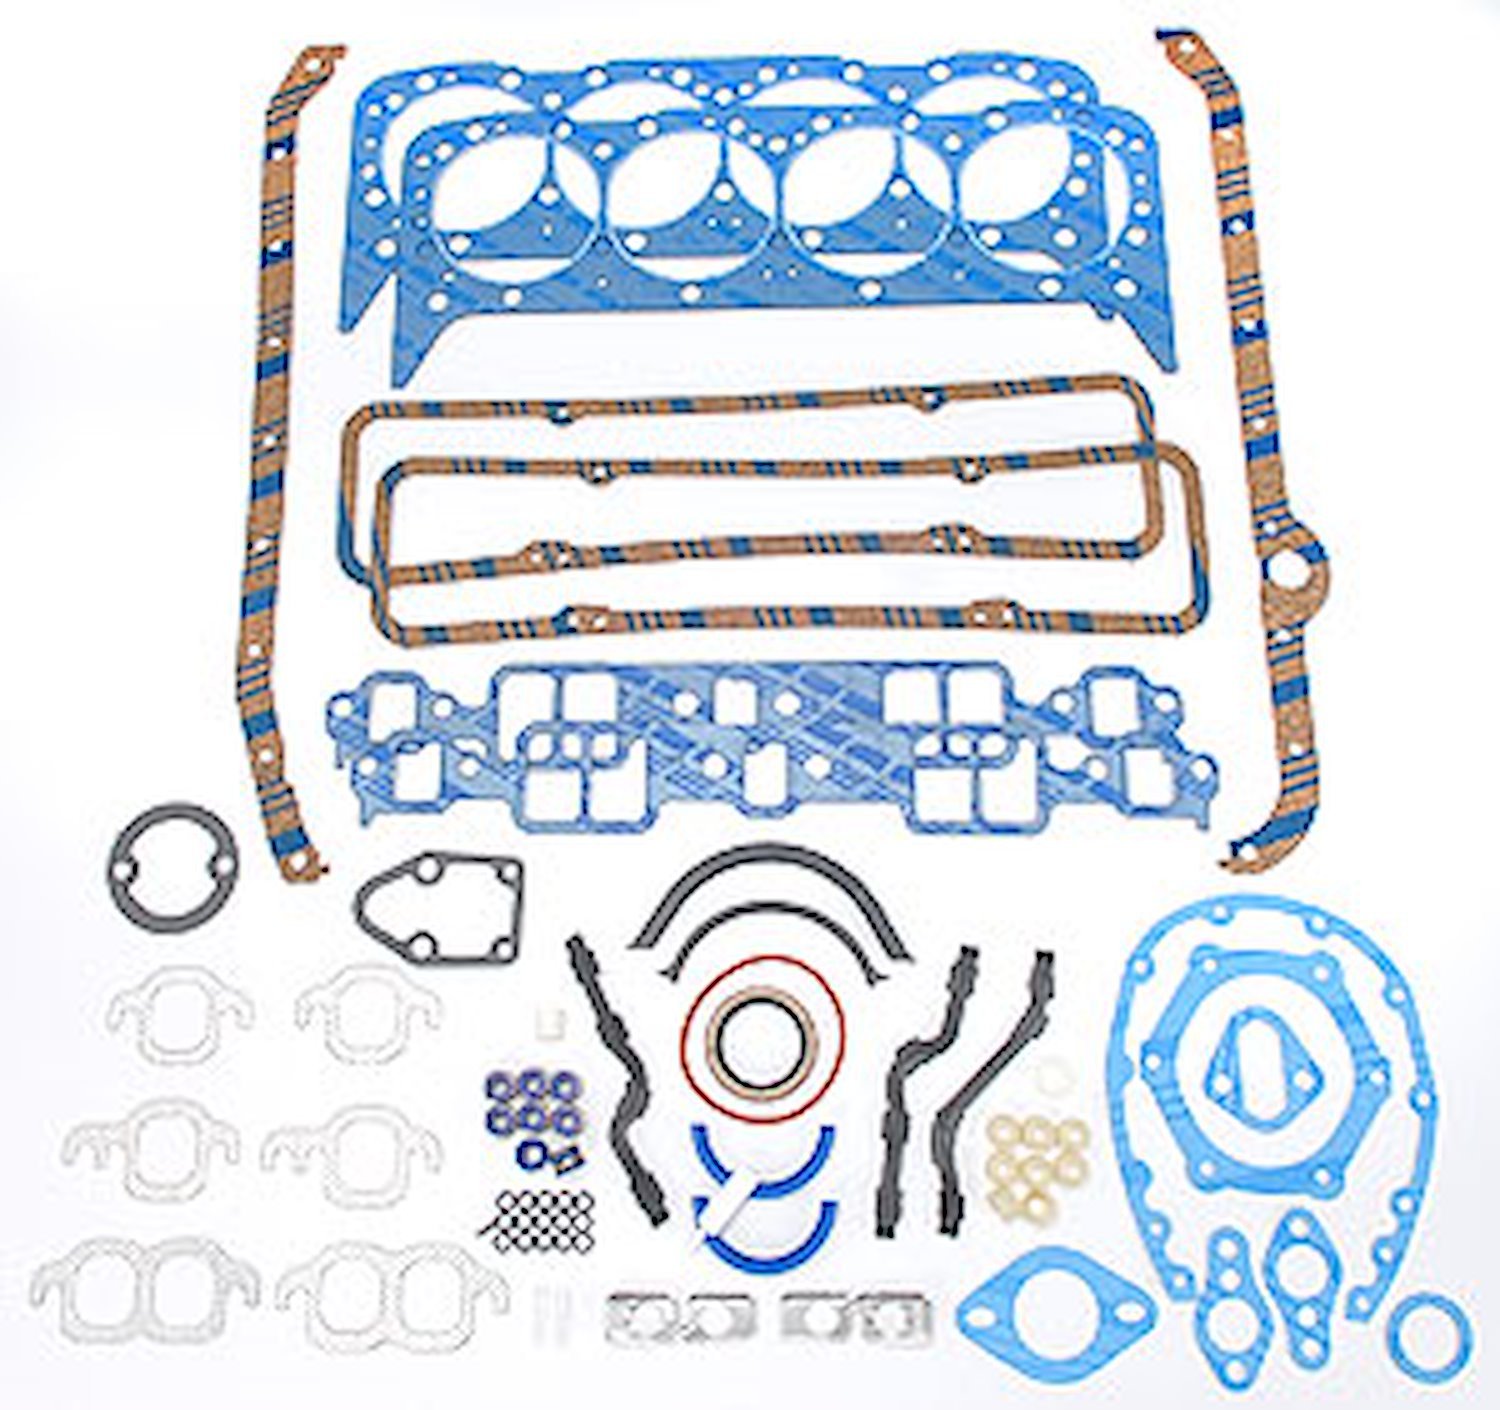 260-1045 Full Engine Gasket Set for 1980-1985 Chevy 350 ci. (5.7L) Small Block Engines